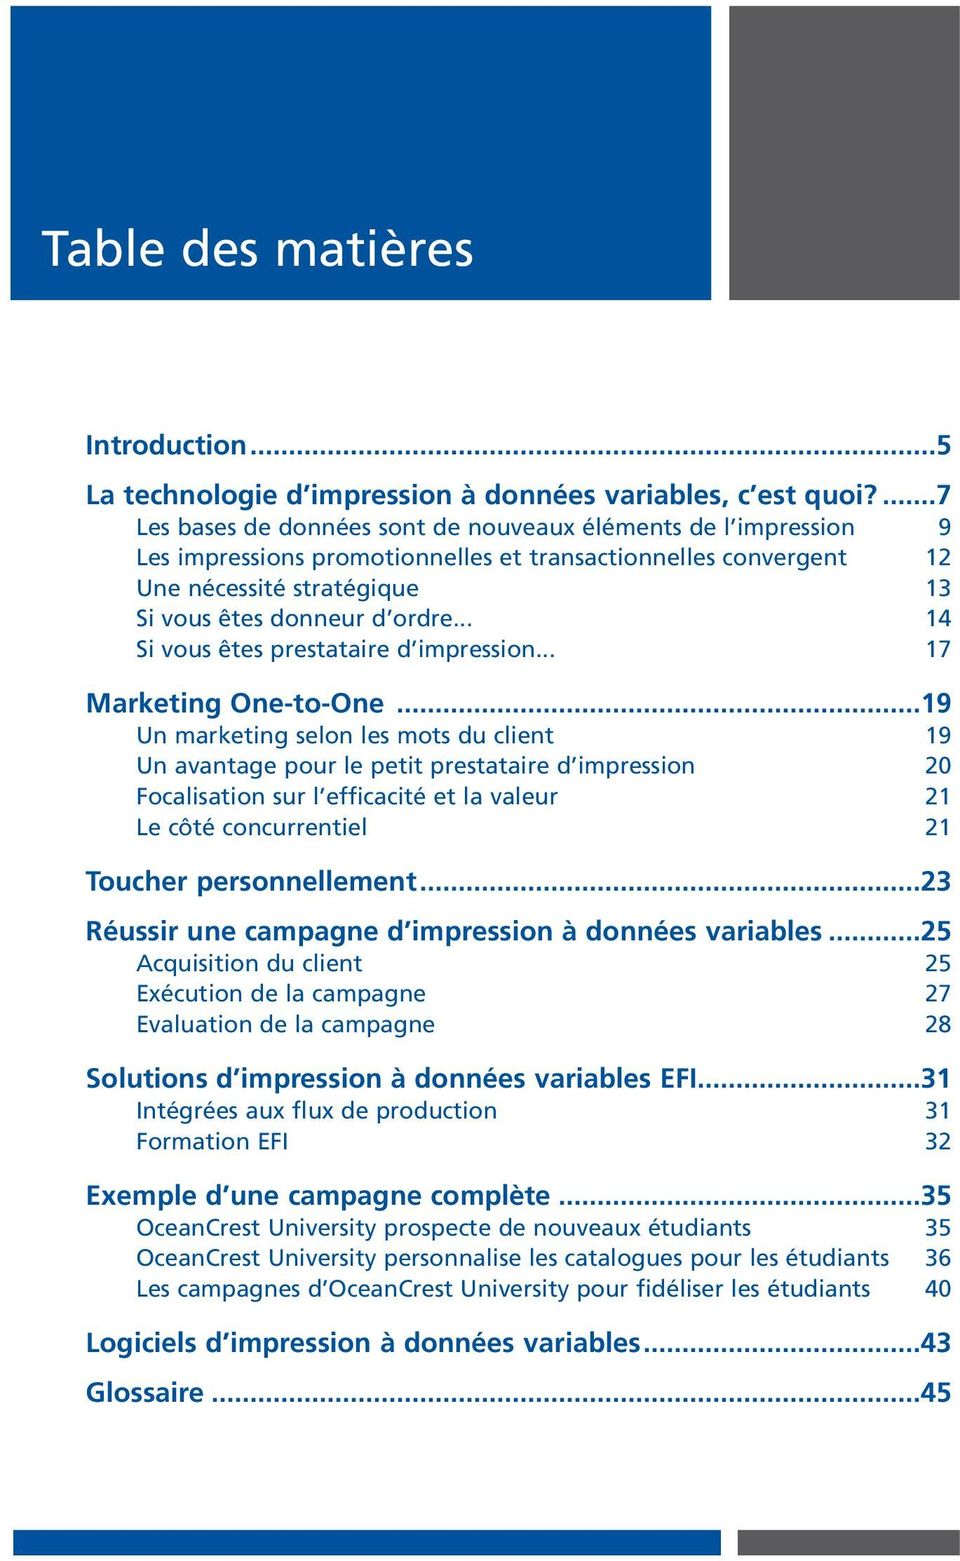 .. 14 Si vous êtes prestataire d impression... 17 Marketing One-to-One.